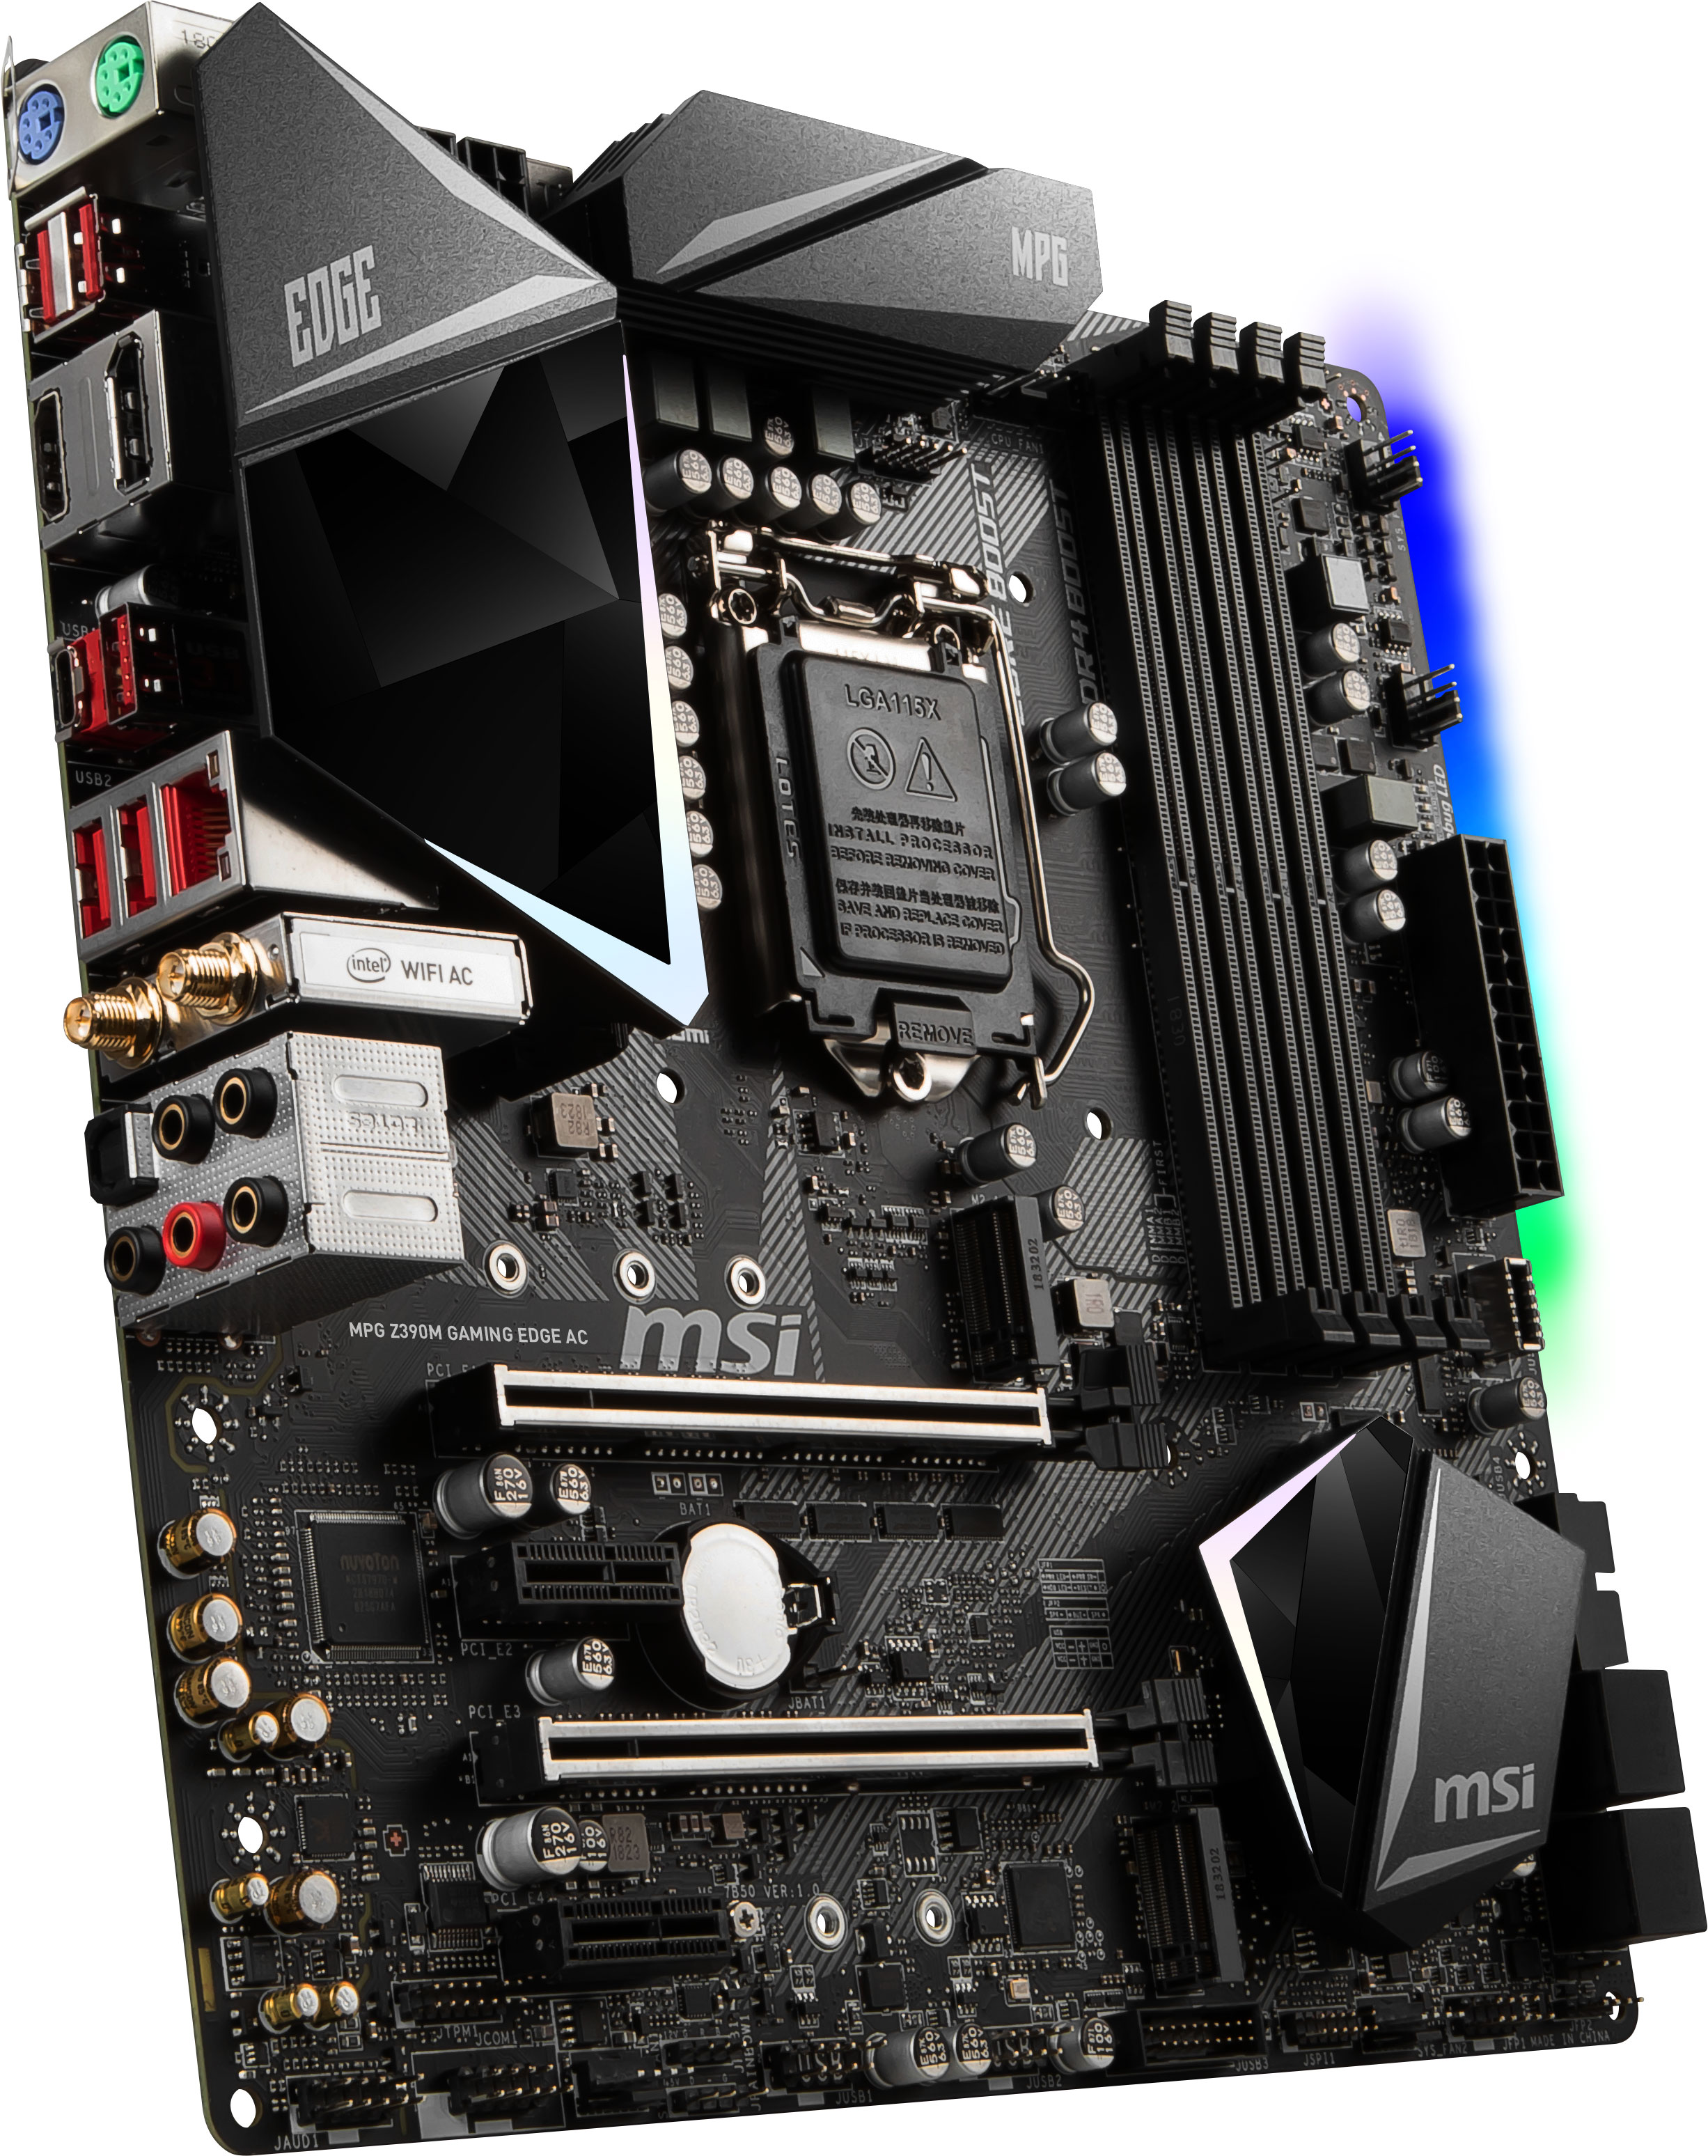 MSI MPG Z390M Gaming Edge AC - Intel Z390 Motherboard Overview: 50